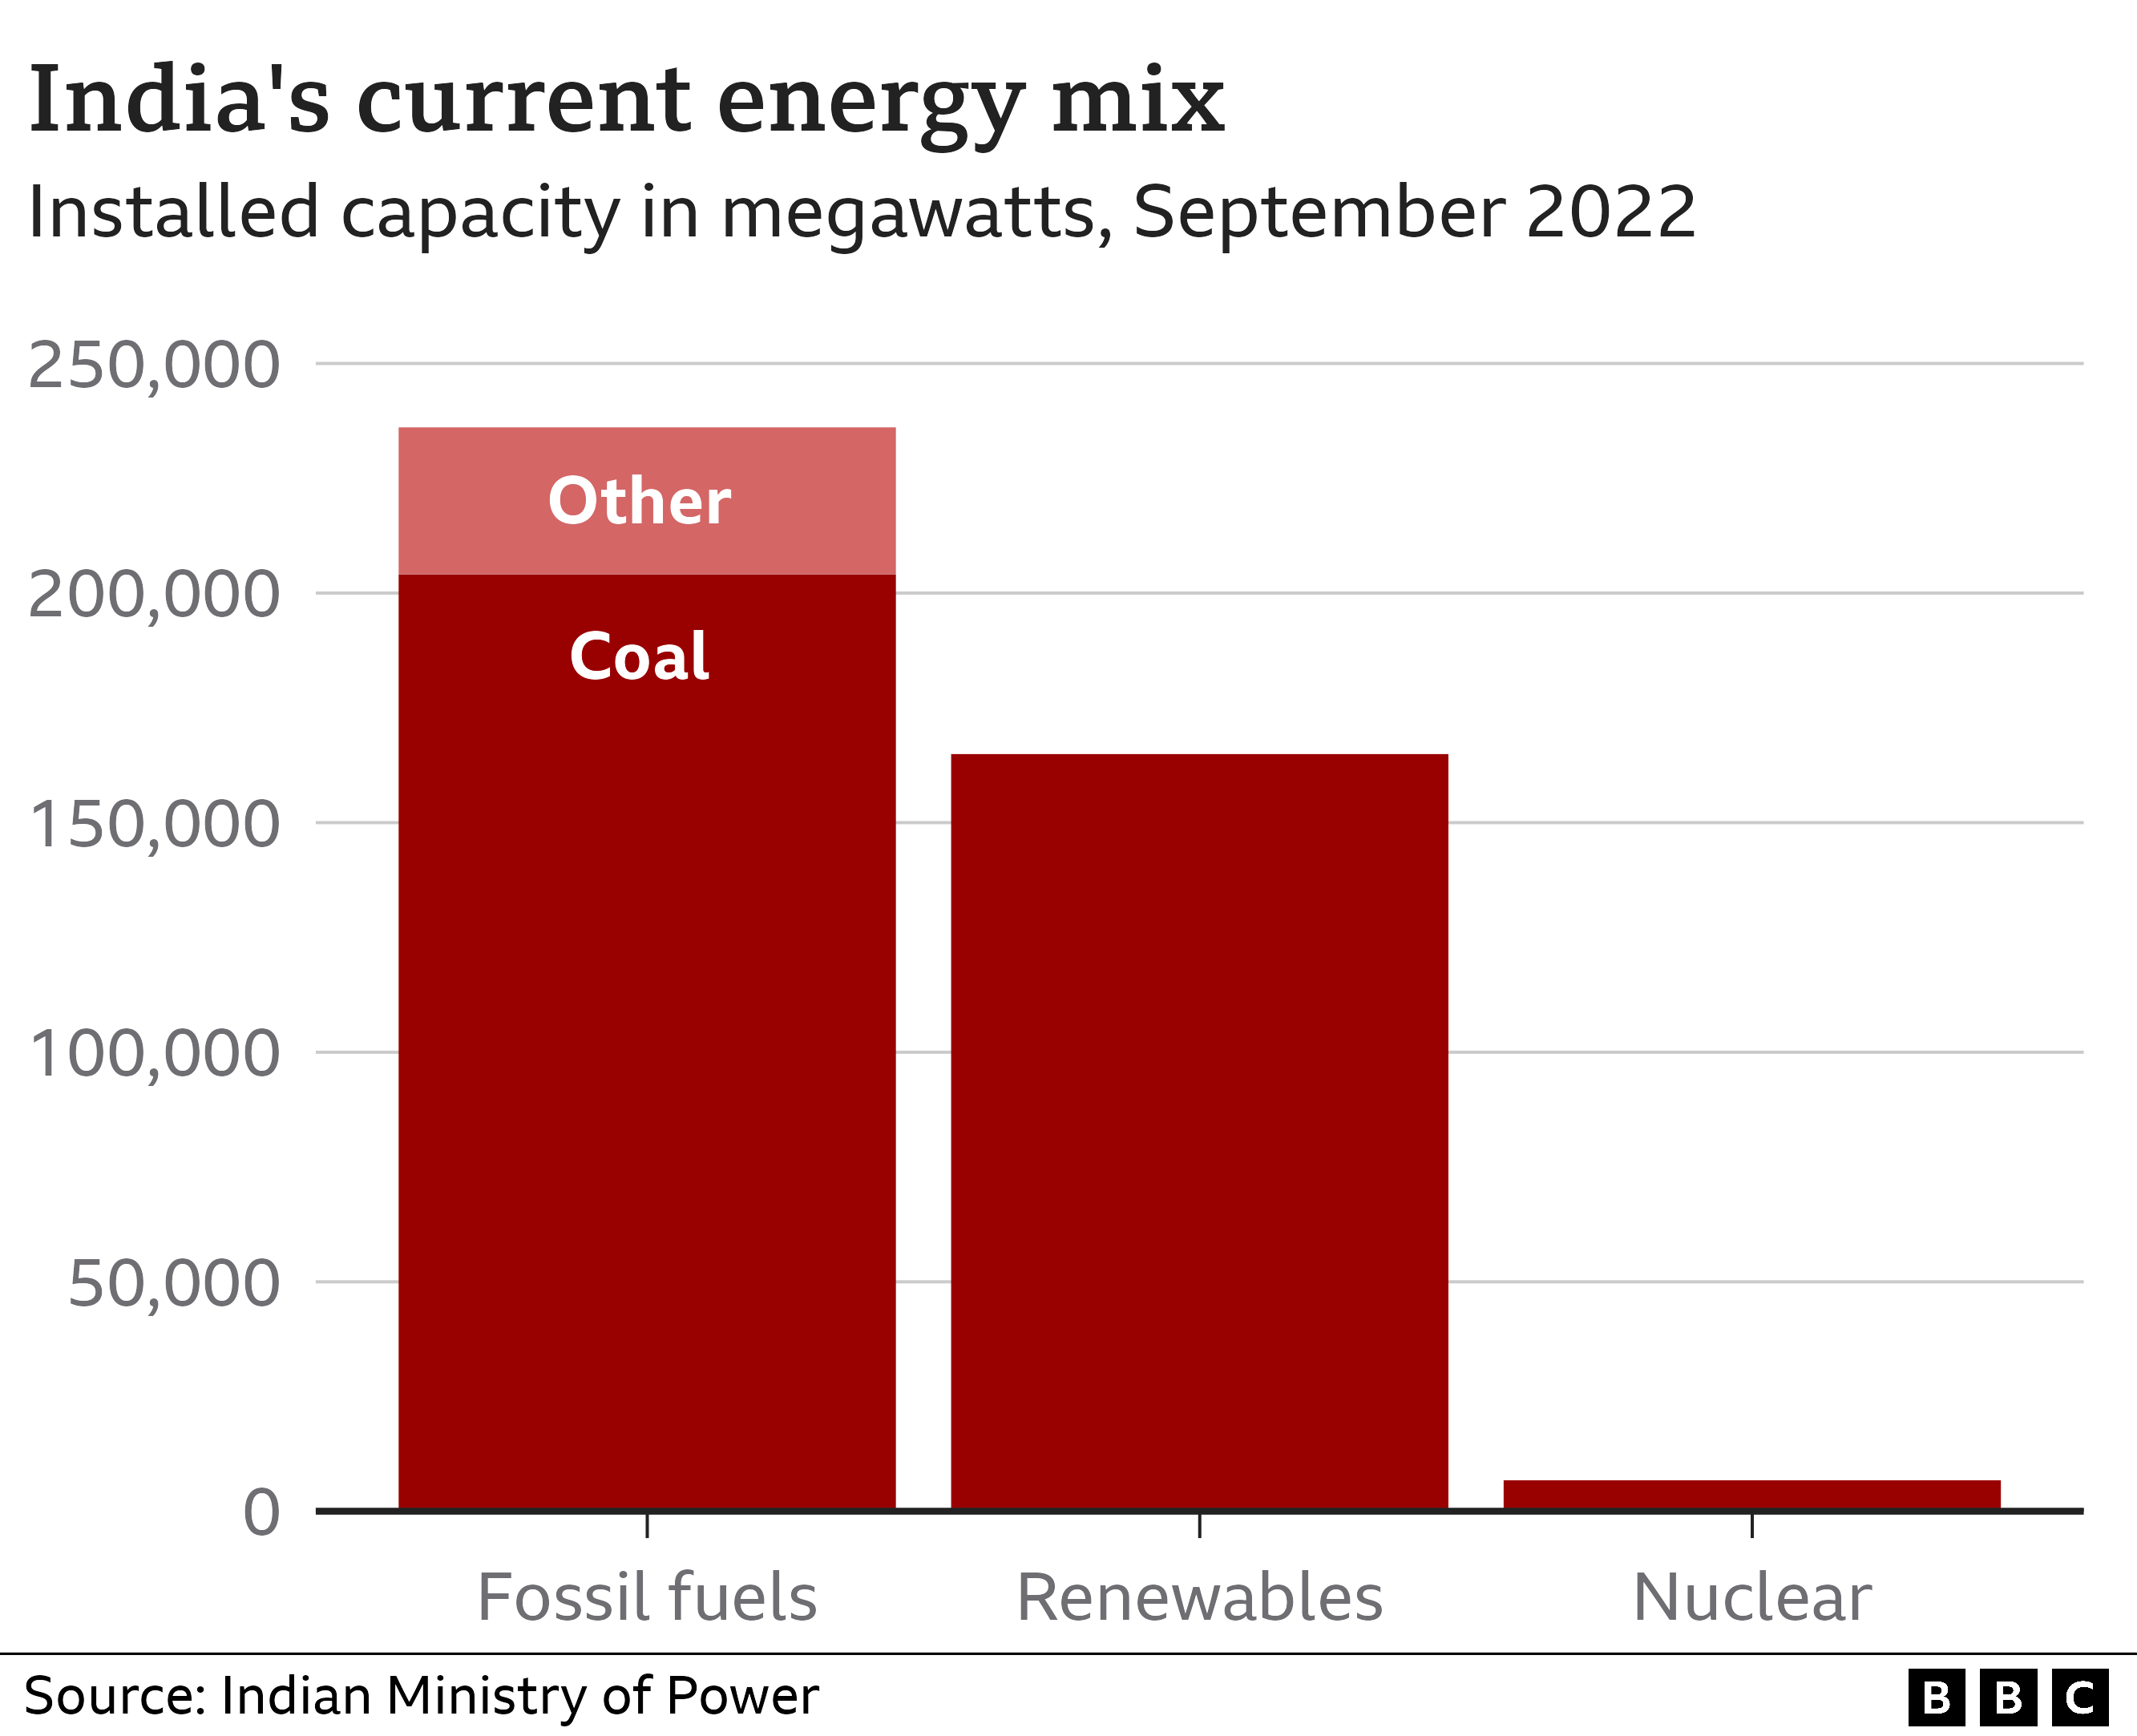 Bar chart showing India's energy mix as of September 2022